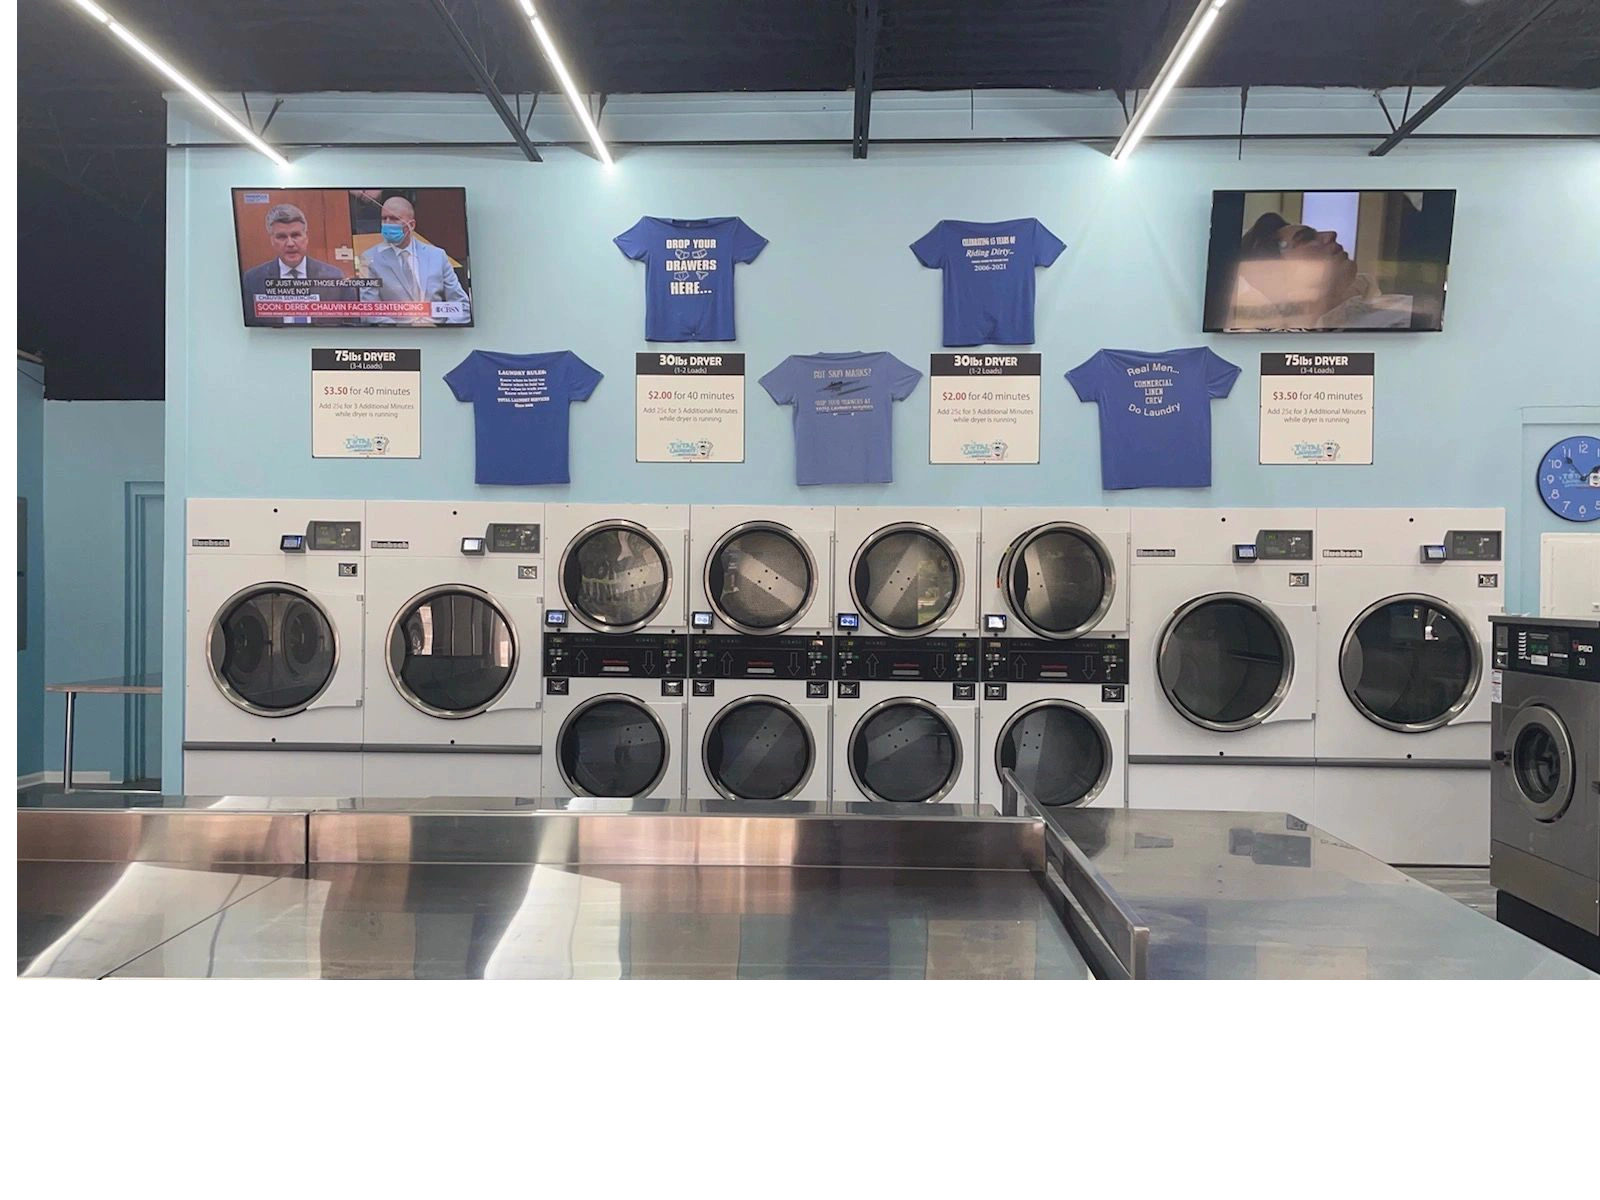 Niceville's Total Laundry Services - Laundromat, Dry Cleaning